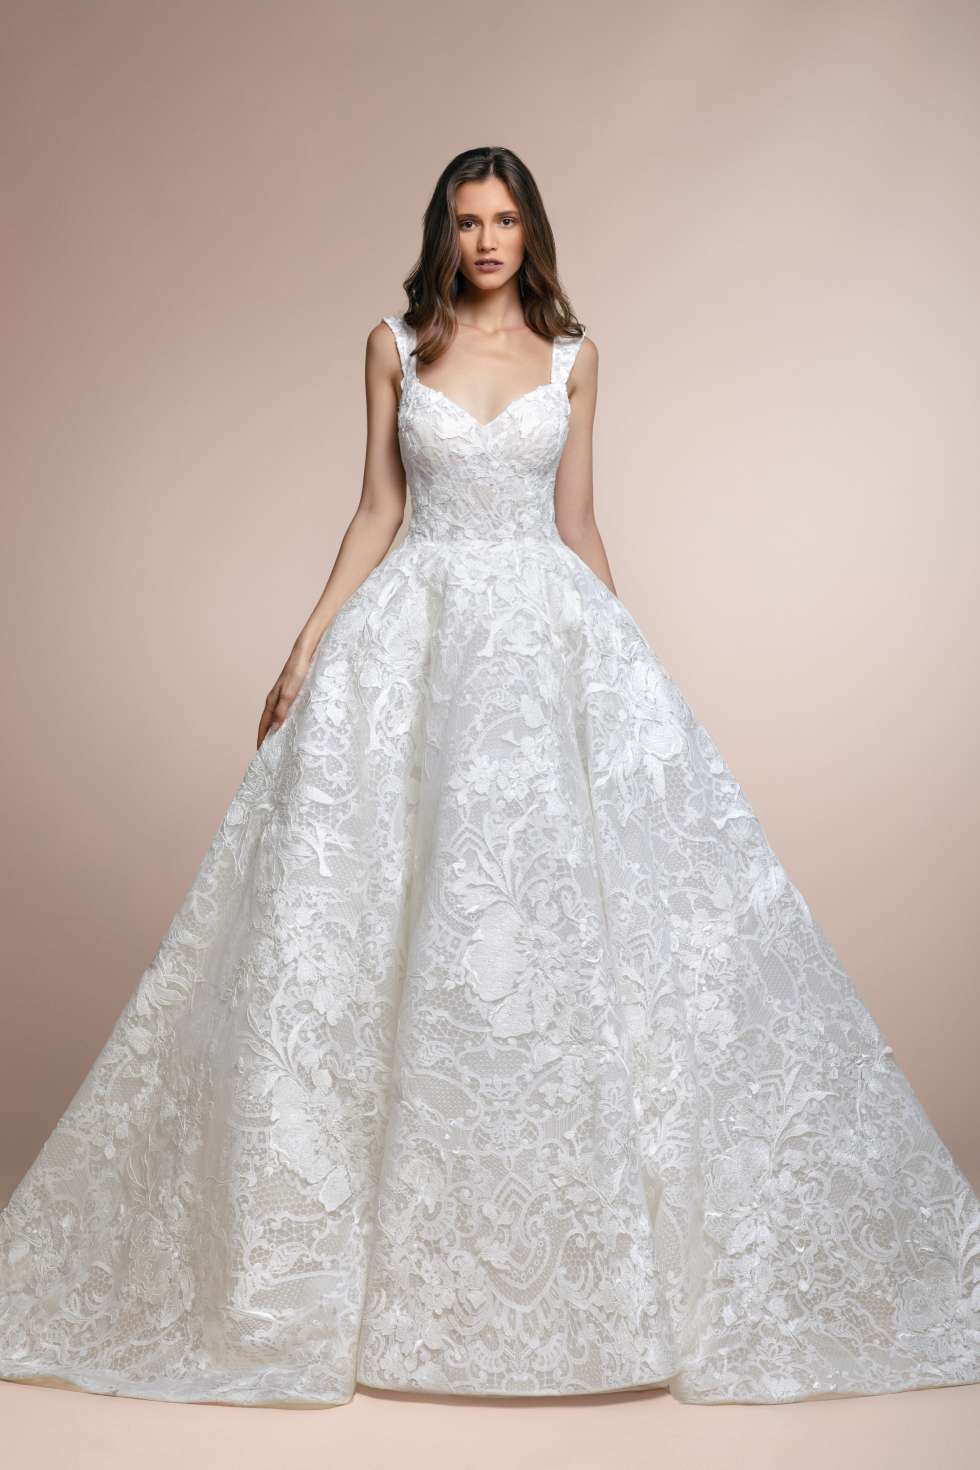 Plume by Esposa 2020 Collection Inspired by Fairytale Memories